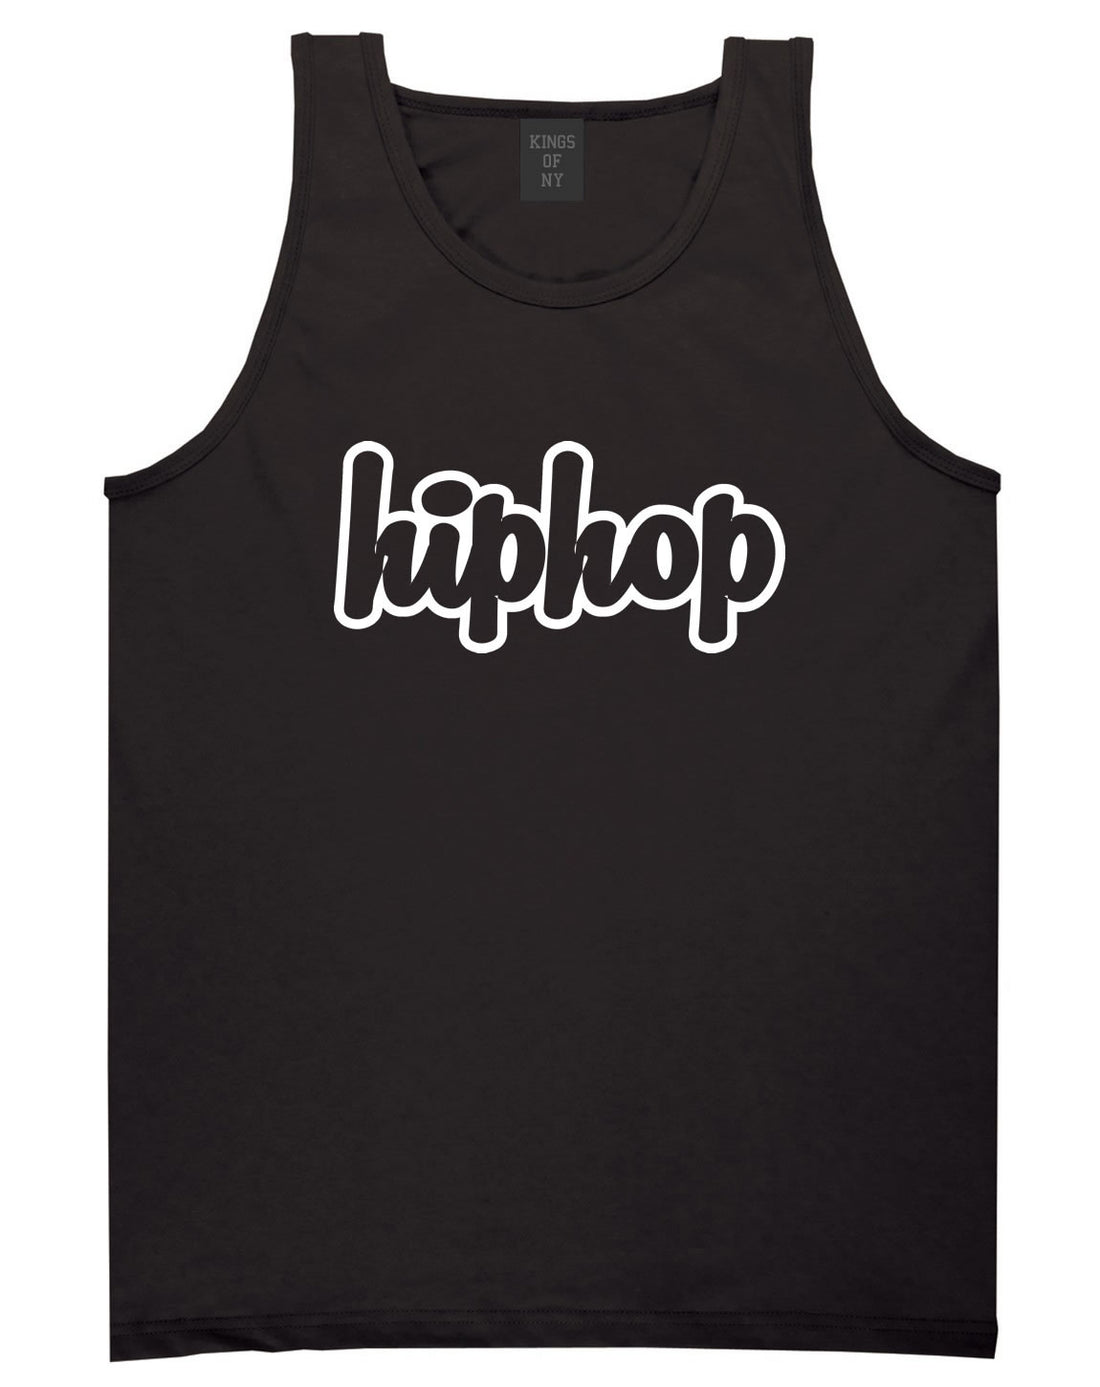 Hiphop Outline Old School Tank Top in Black By Kings Of NY